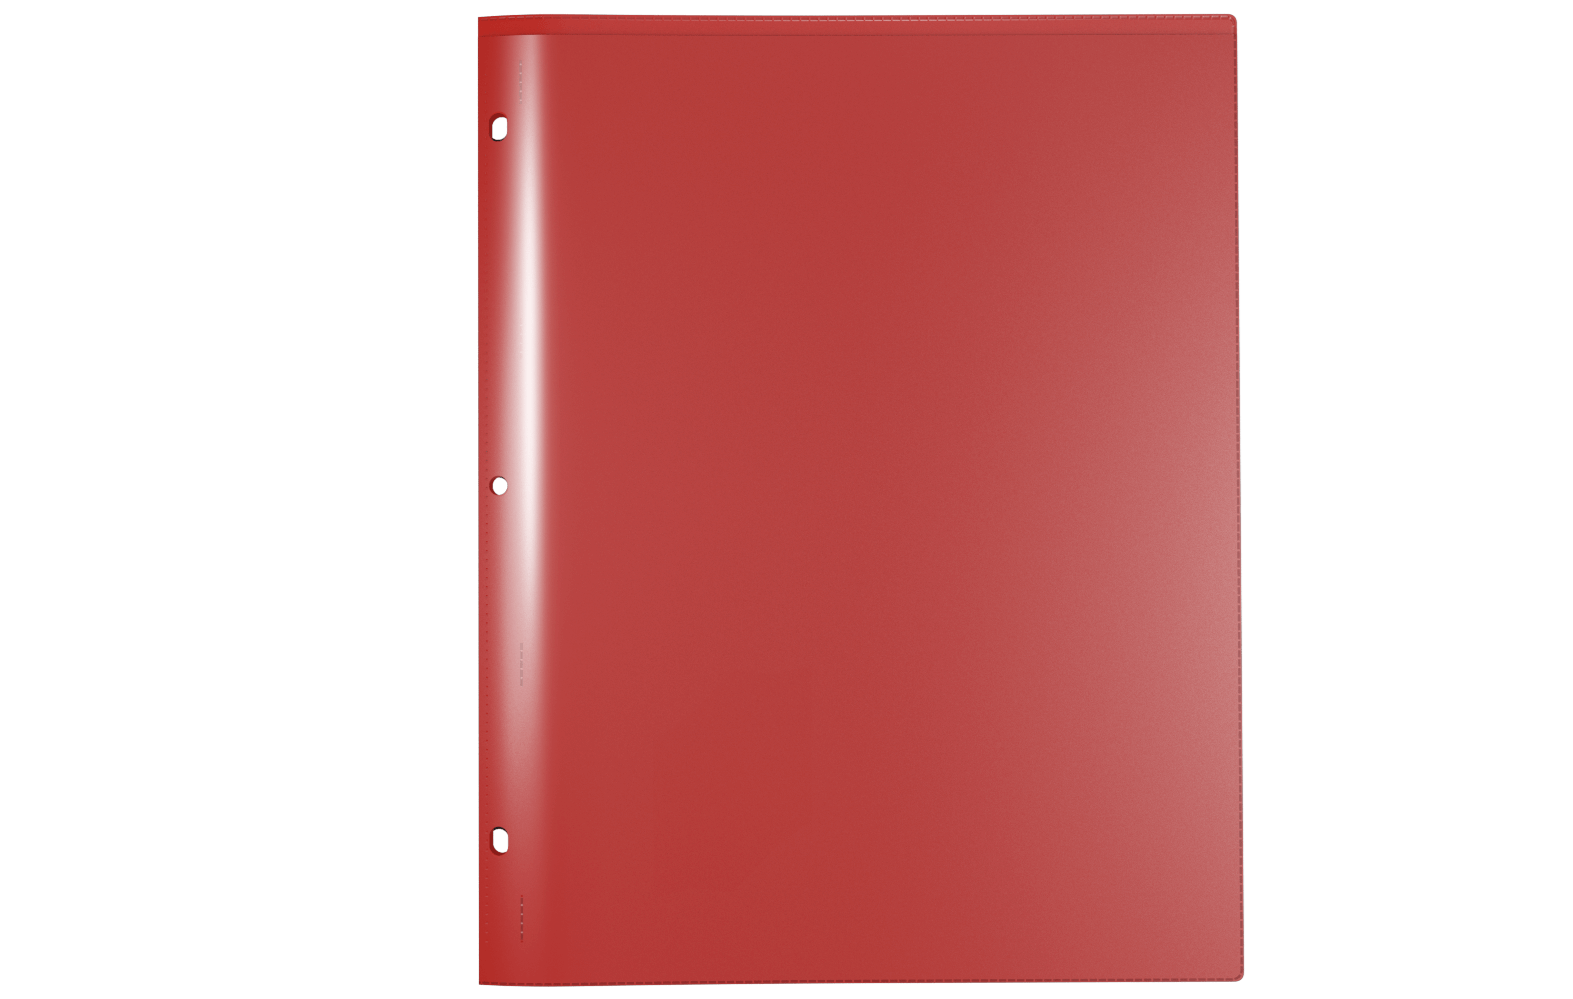 Front view of Nicky's 6 Multi Pocket Sleeves Folder used for presentation.